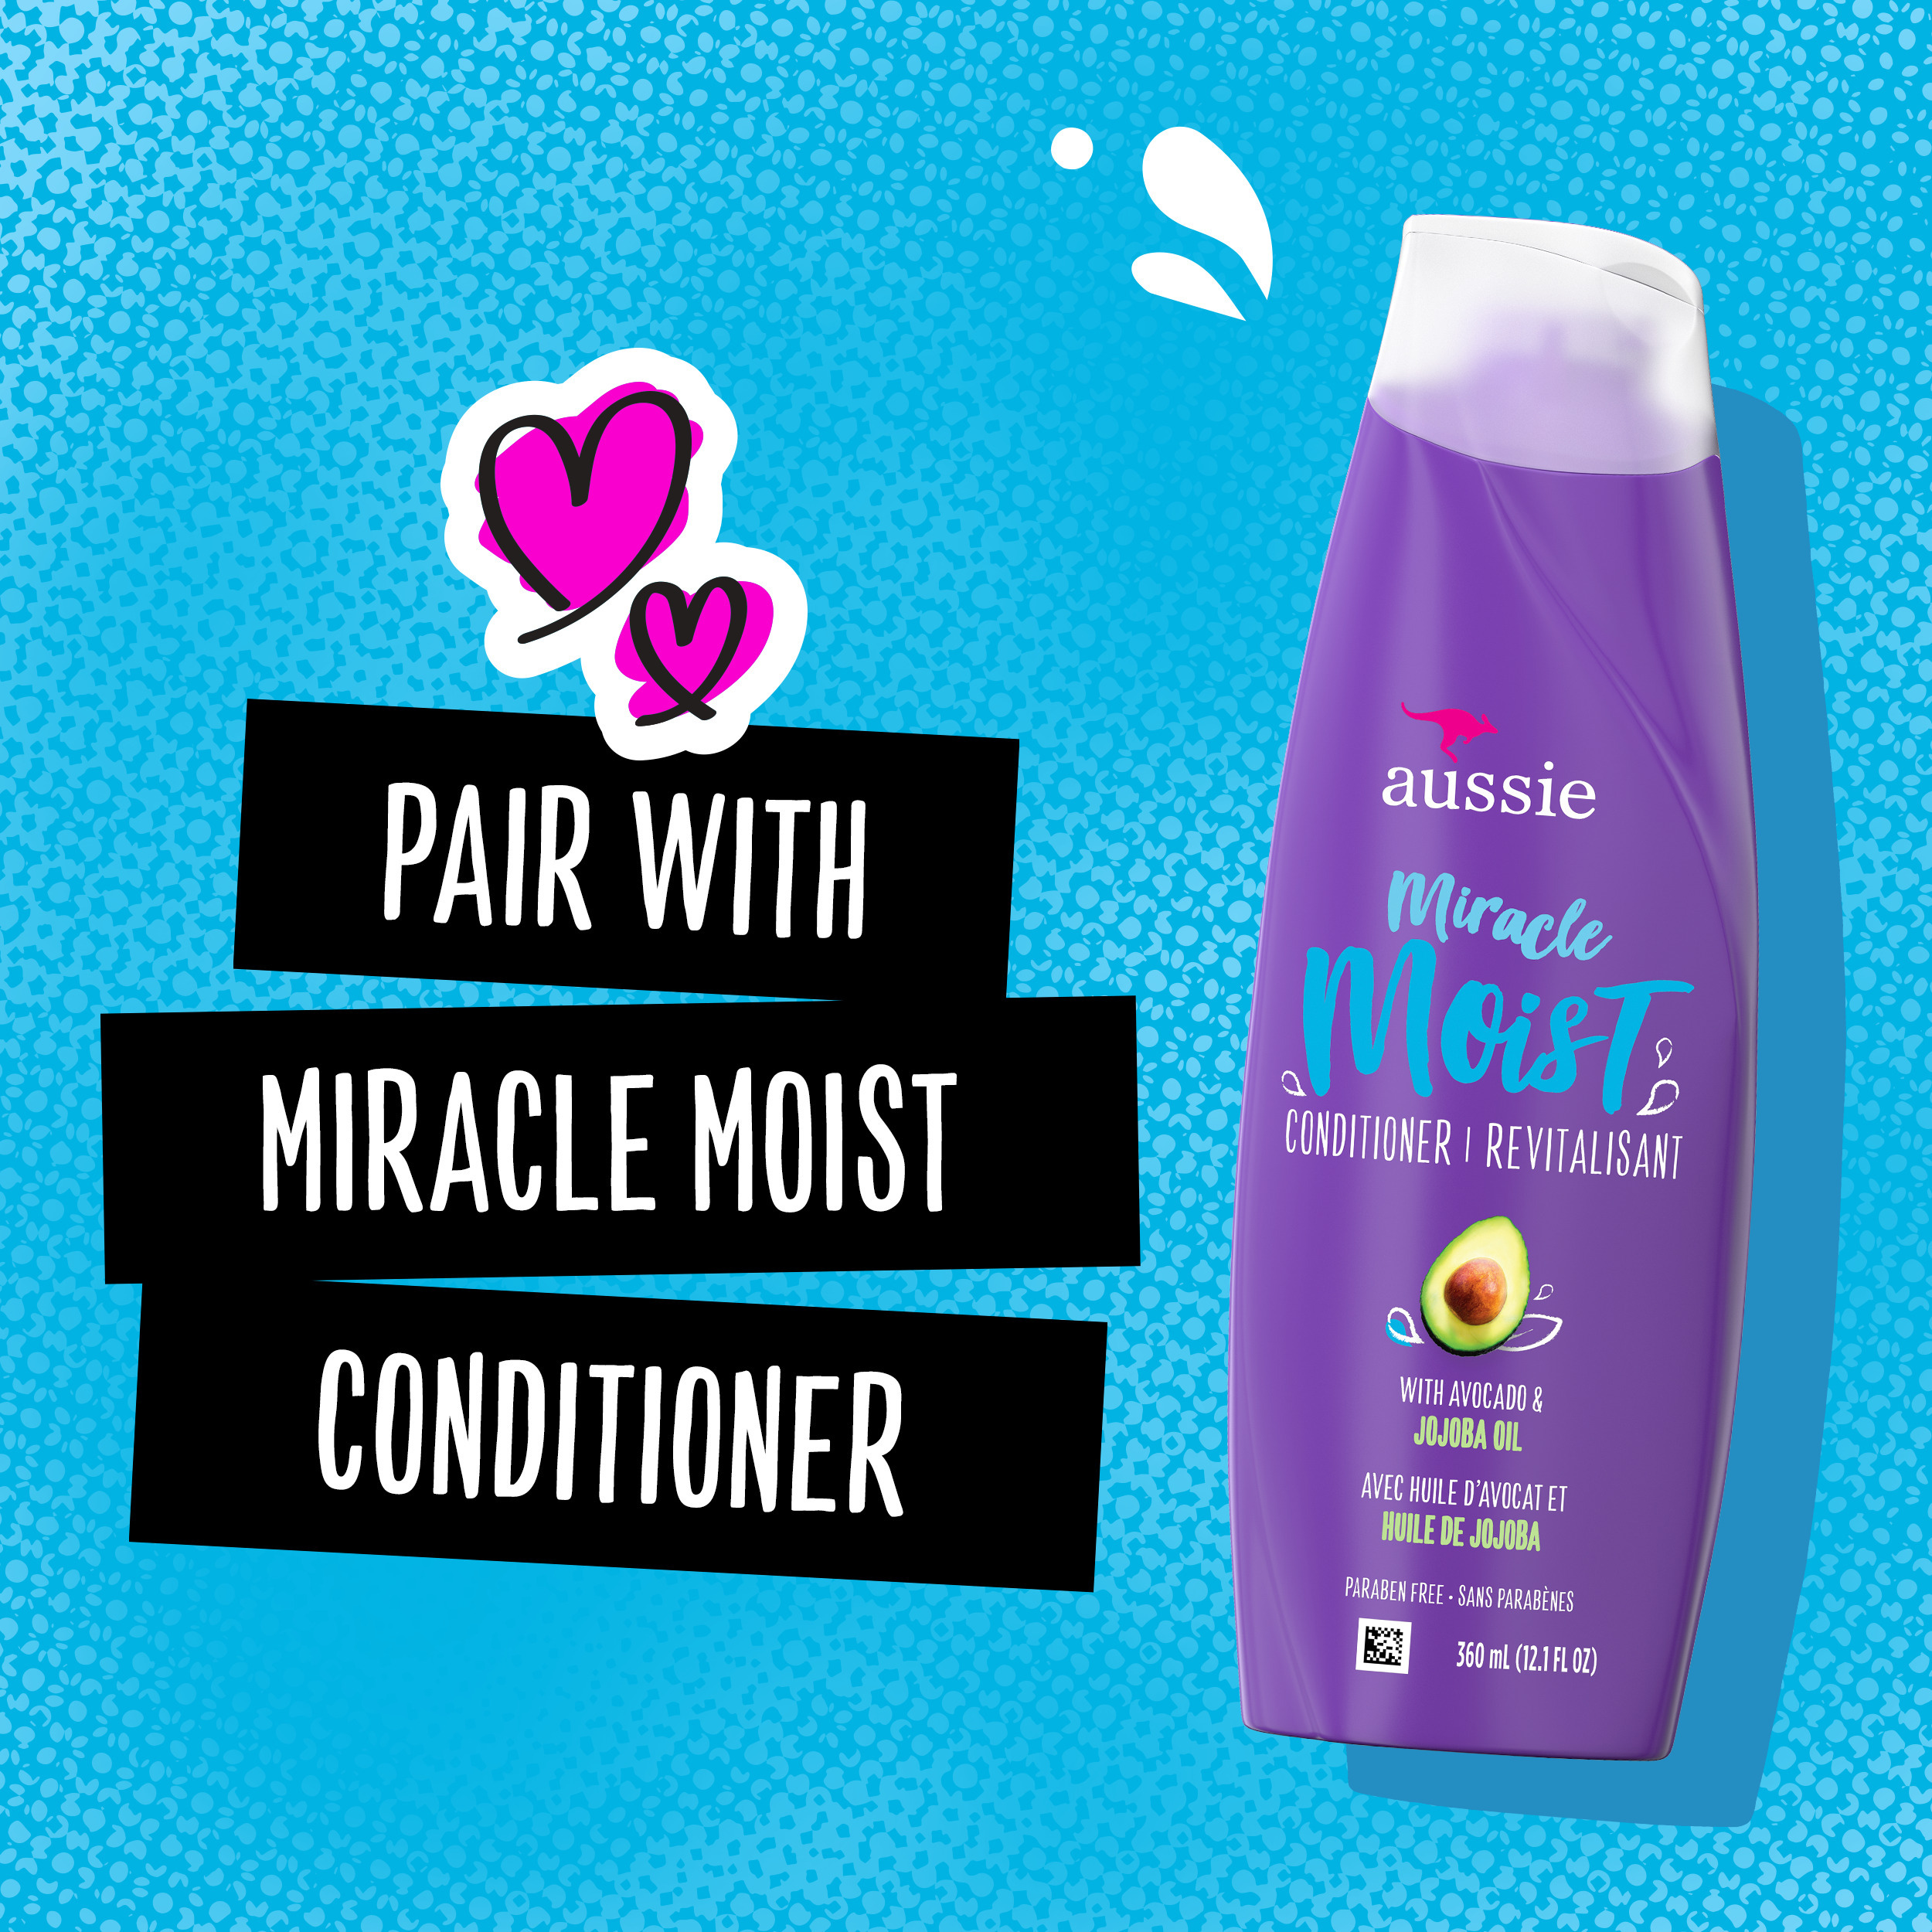 Aussie Miracle Moist Shampoo for All Hair Types with Avocado, Moisturizing, Paraben Free, 12.1 fl oz - image 6 of 9